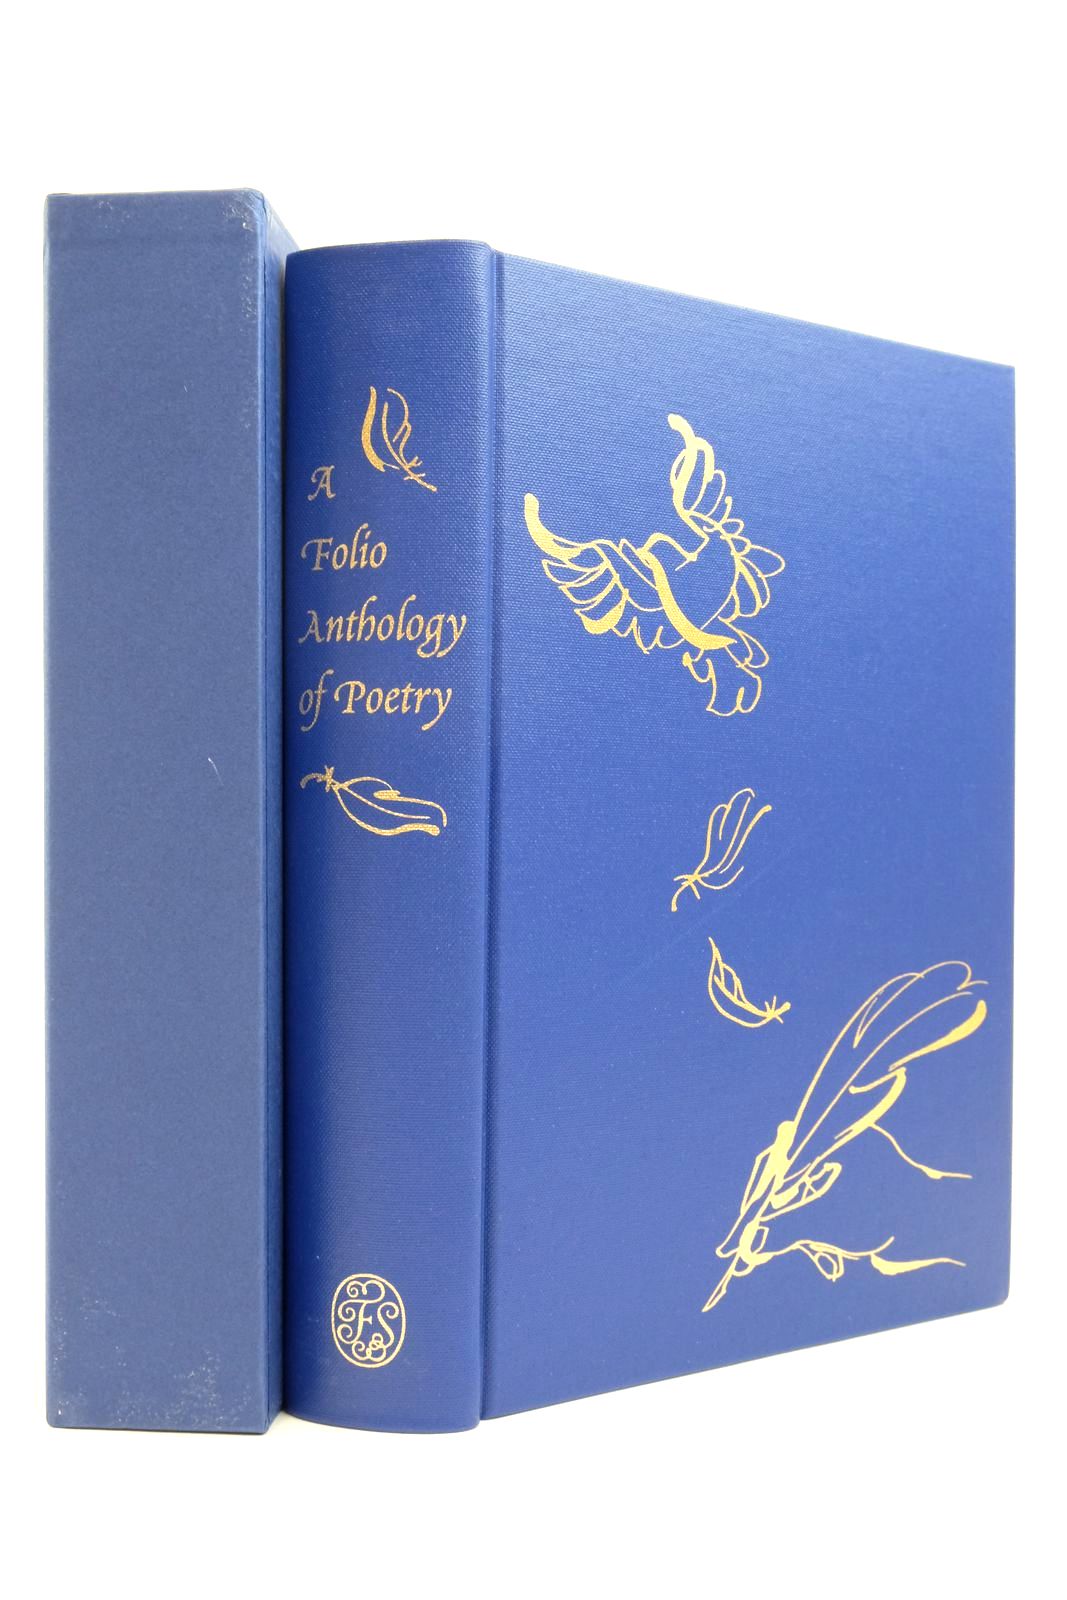 Photo of A FOLIO ANTHOLOGY OF POETRY- Stock Number: 2138446